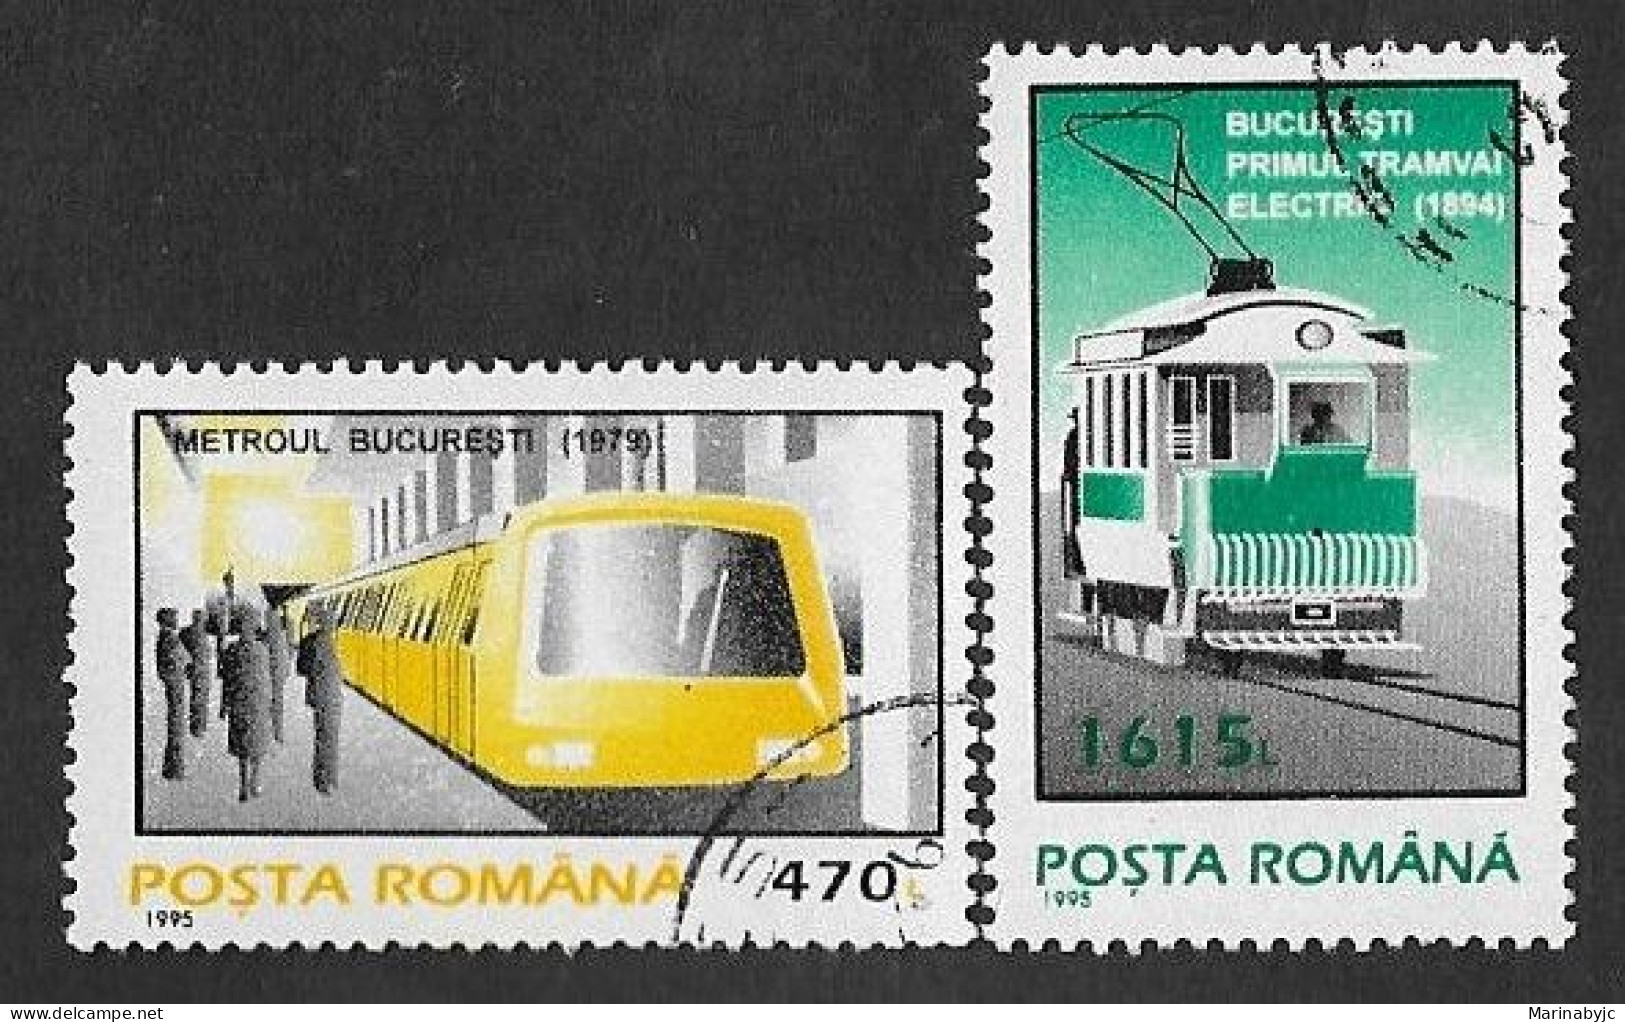 SE)1995 ROMANIA, FROM THE TRAINS SERIES, THE BUCHAREST METRO, 1ST ELECTRIC TRAIN, 2 CTO STAMPS - Usado